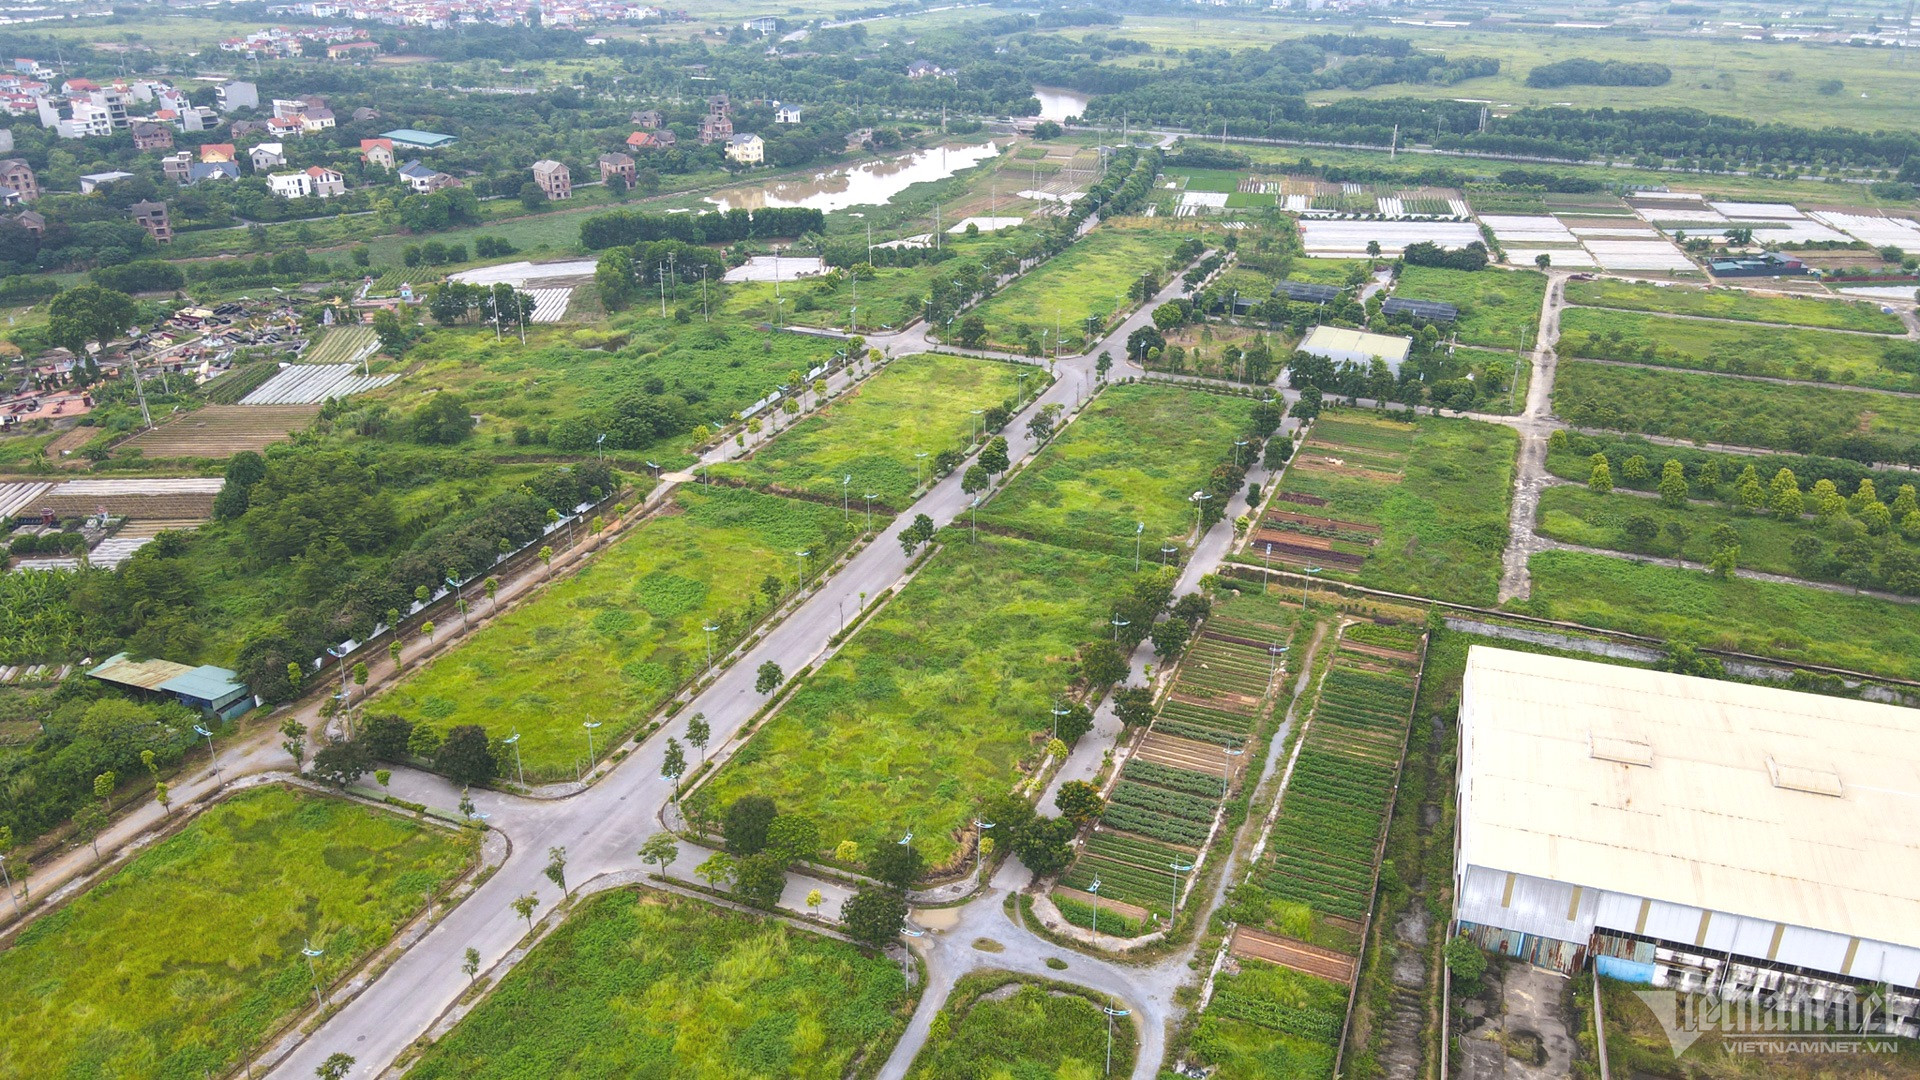 With 2 billion VND ready, where and how to invest in land to make a